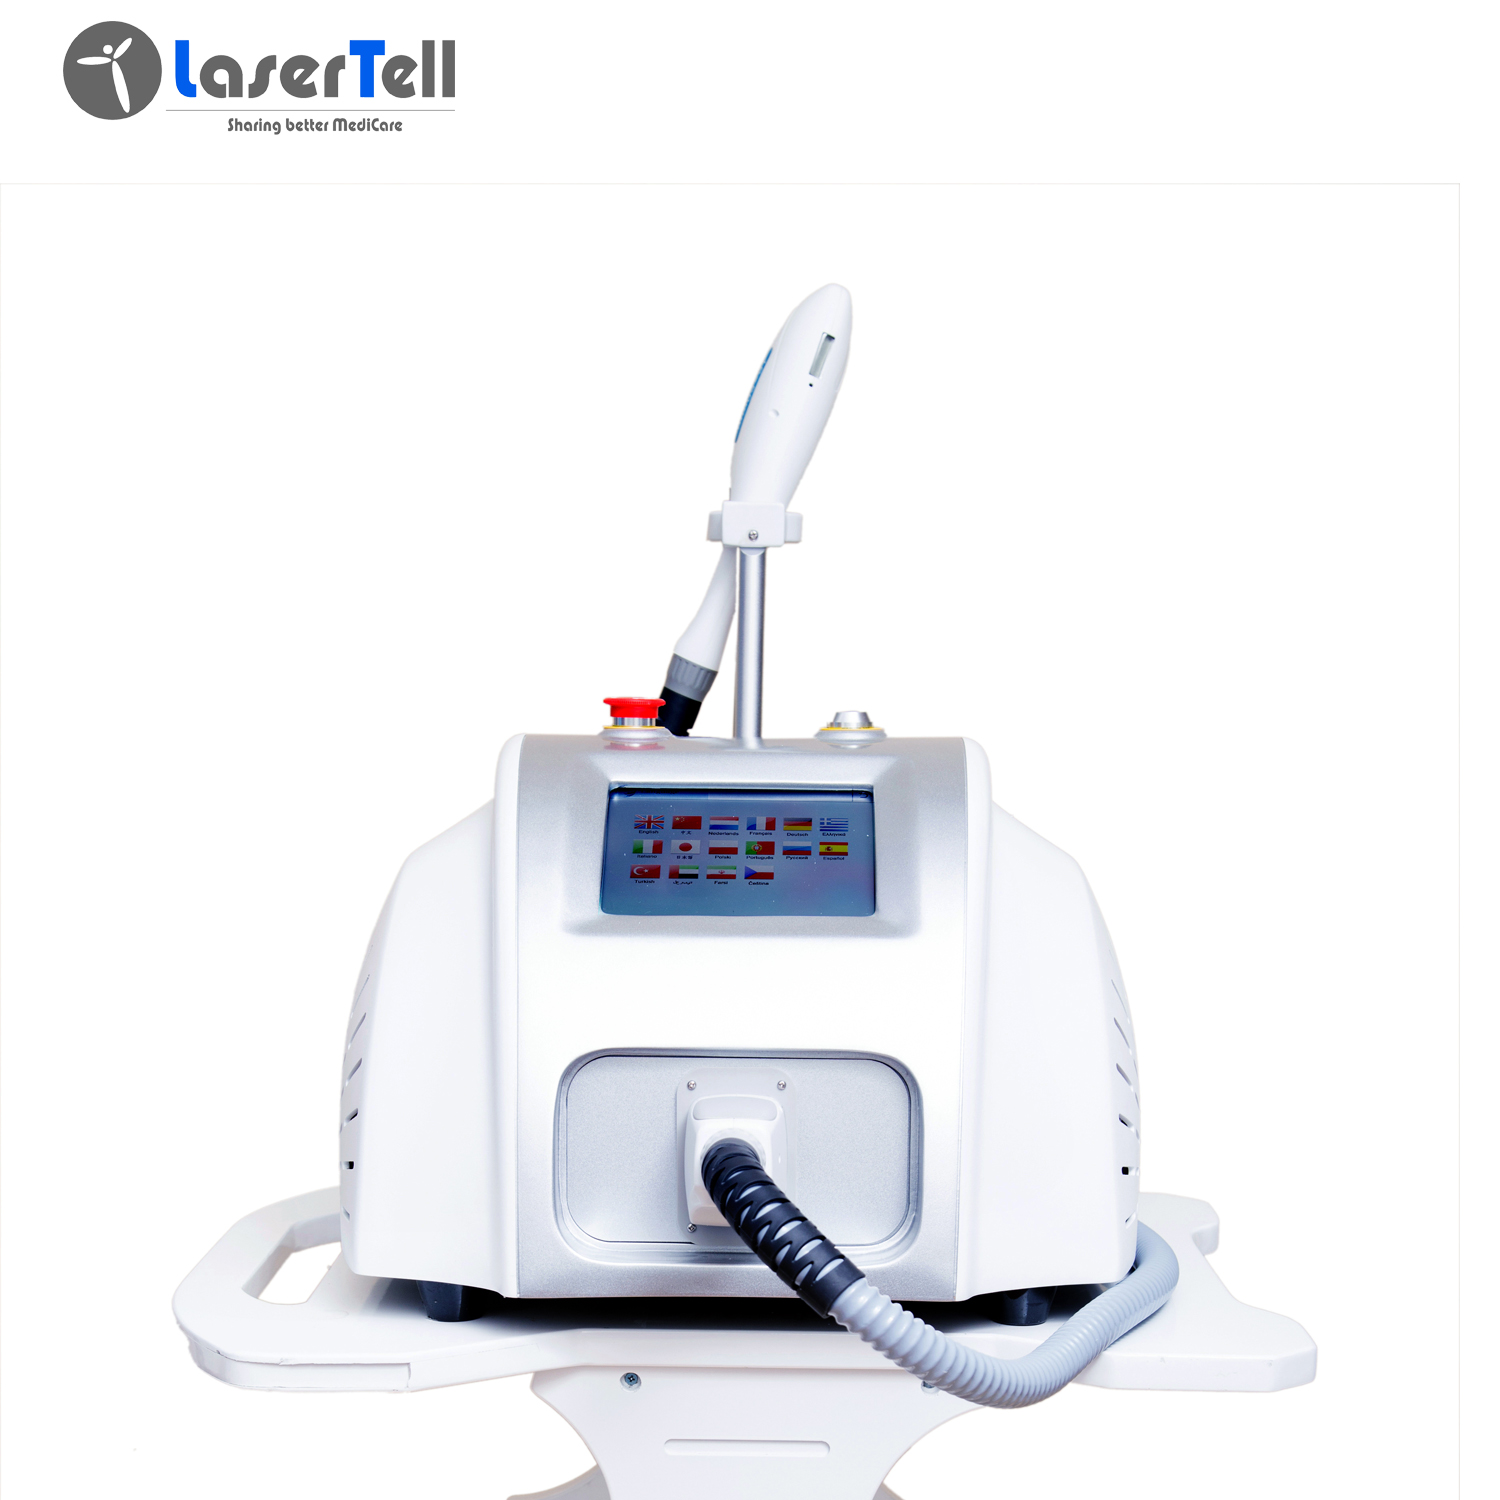 LaserTell hot selling hair removal and skin rejuvenation machine breast lifting